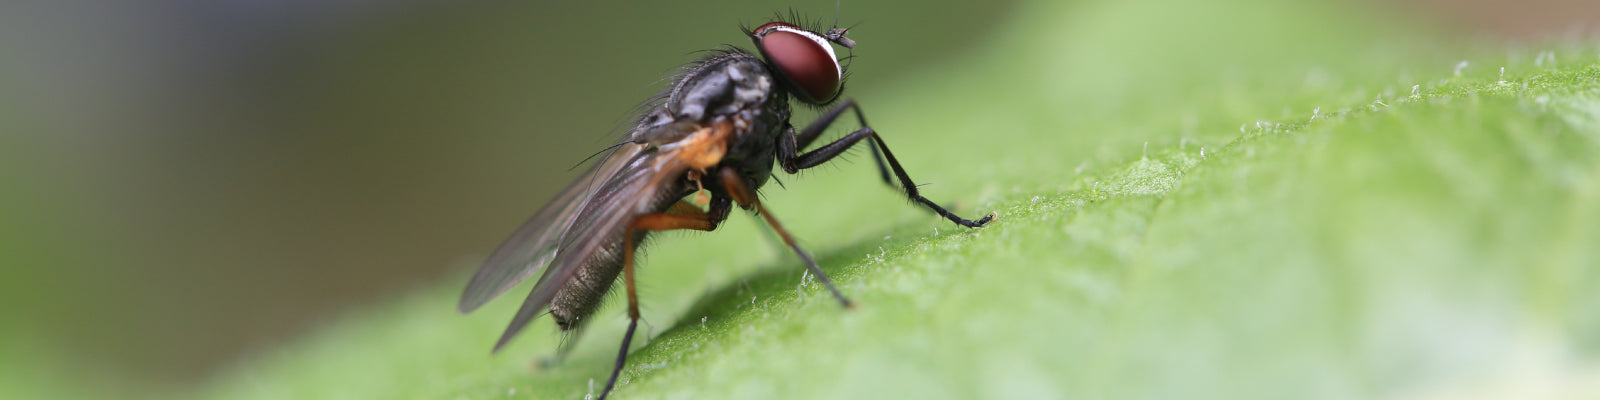 Close up of fly on a leaf